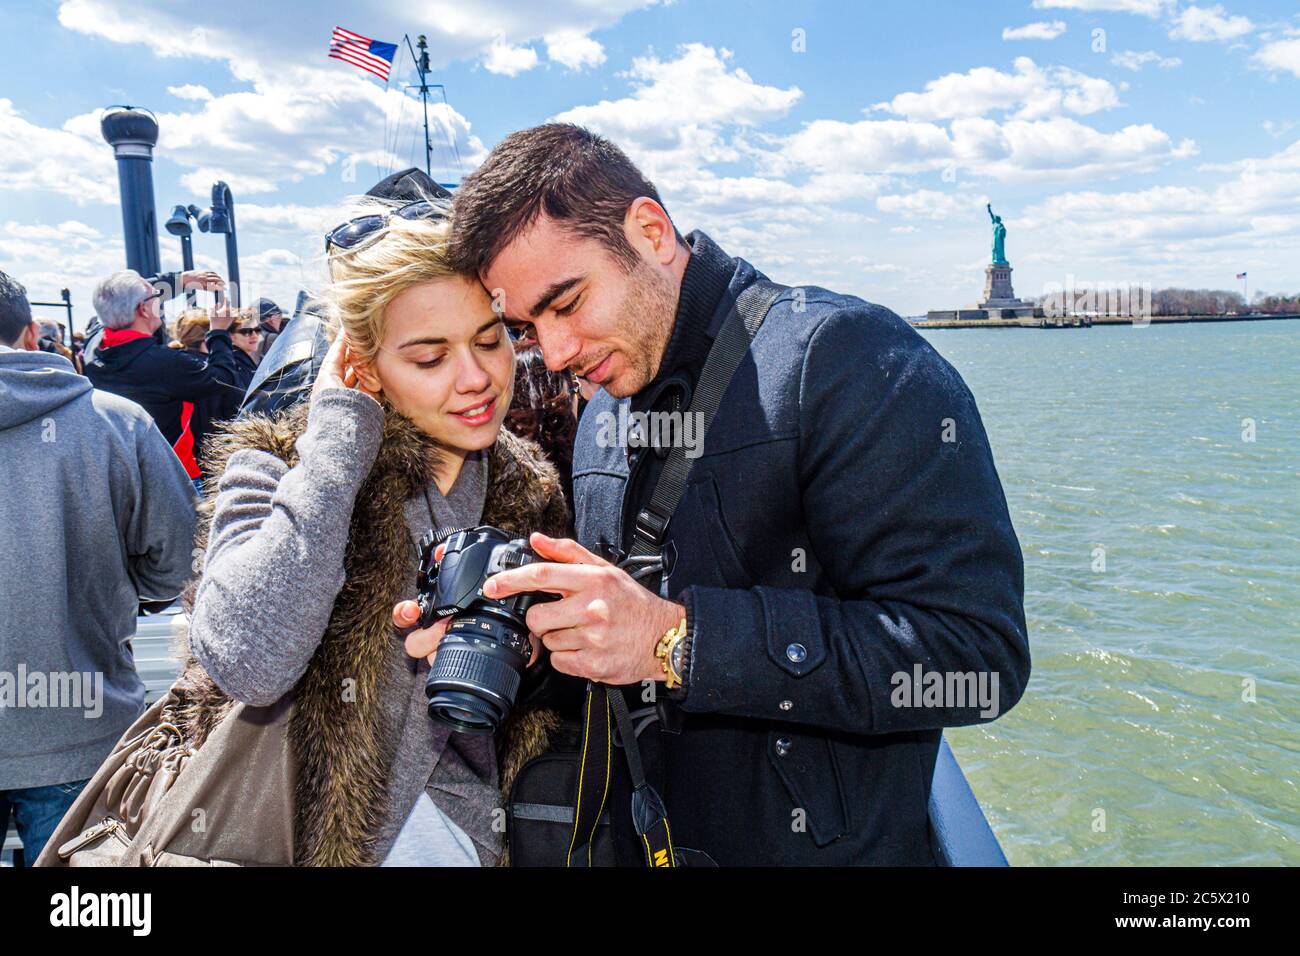 New York City,NYC NY Upper Bay,Statue Cruises,Liberty Island,Statue of Liberty,National Monument,man men male adult adults,woman female women,couple,y Stock Photo